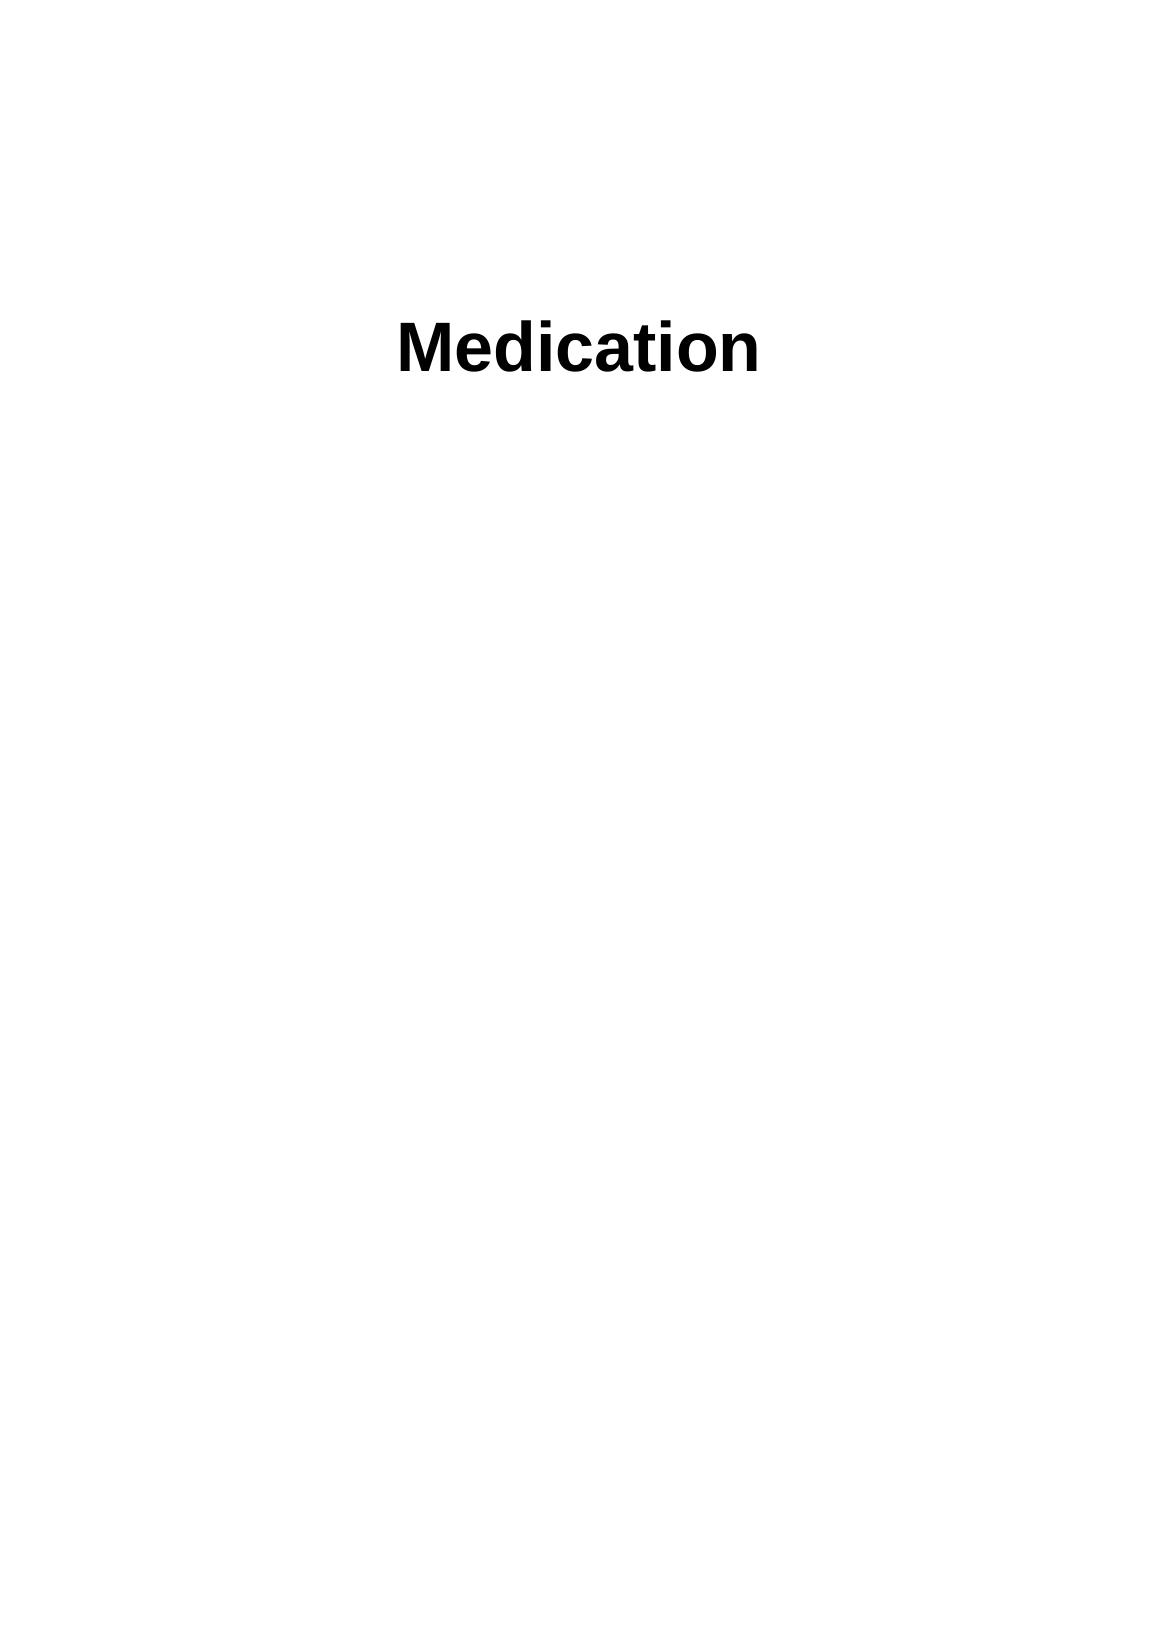 Common Medicines administered in any field_1